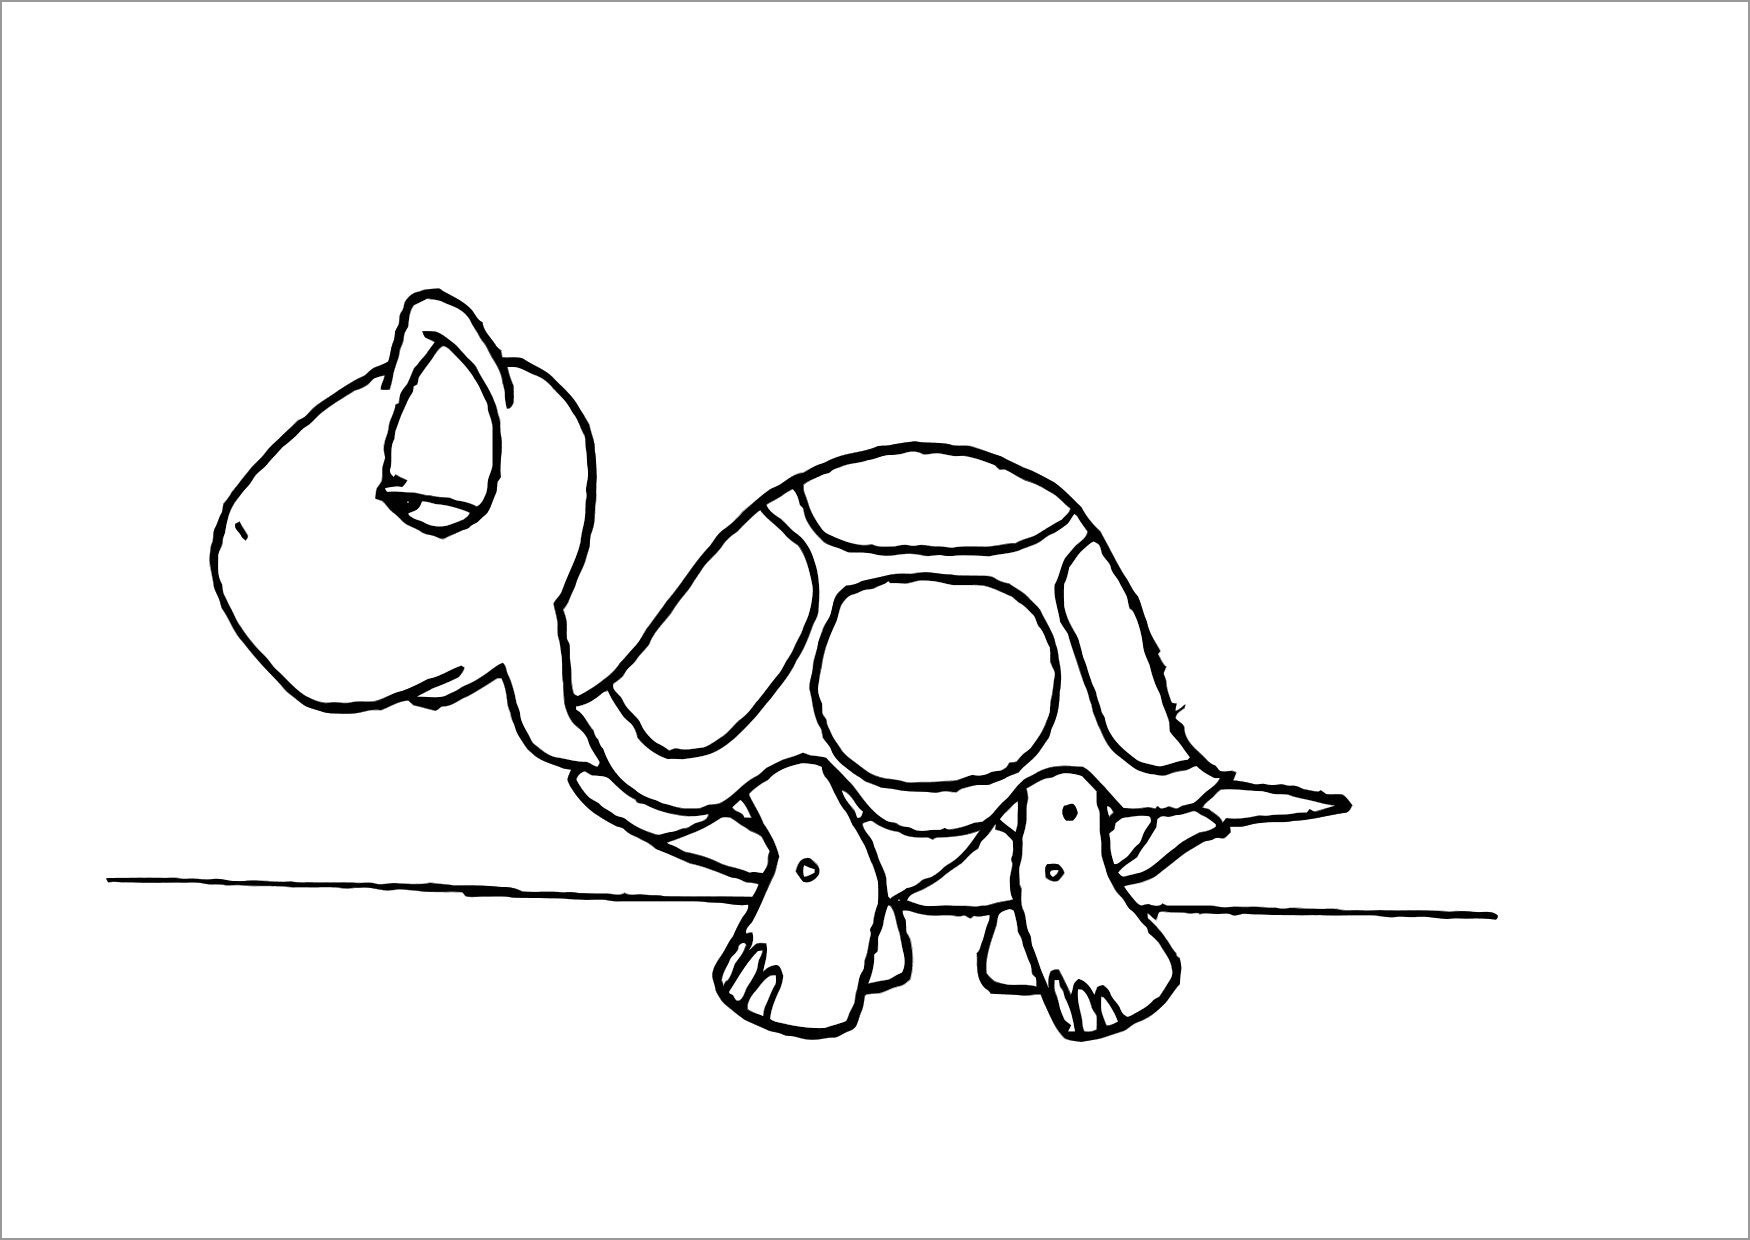 Printable Turtle Coloring Pages for Kids   ColoringBay